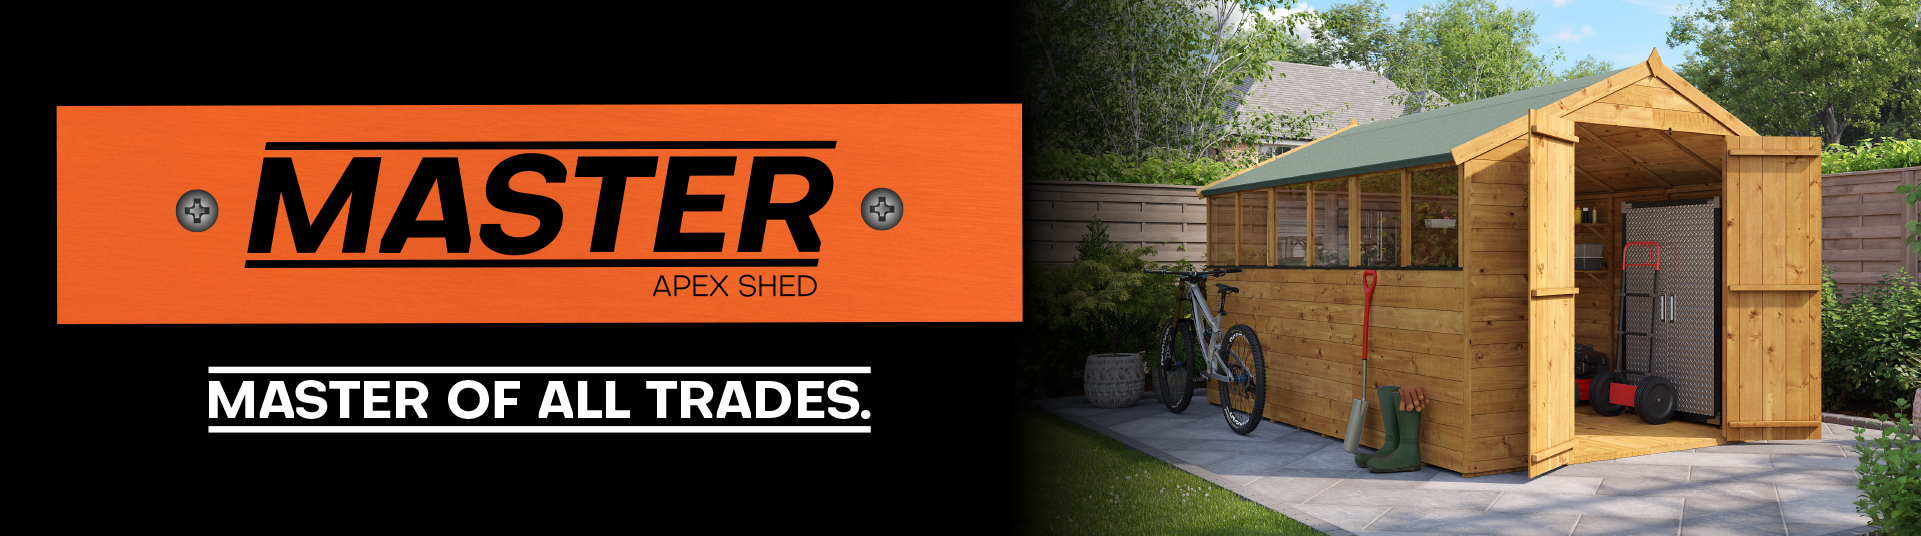 Master Apex Shed